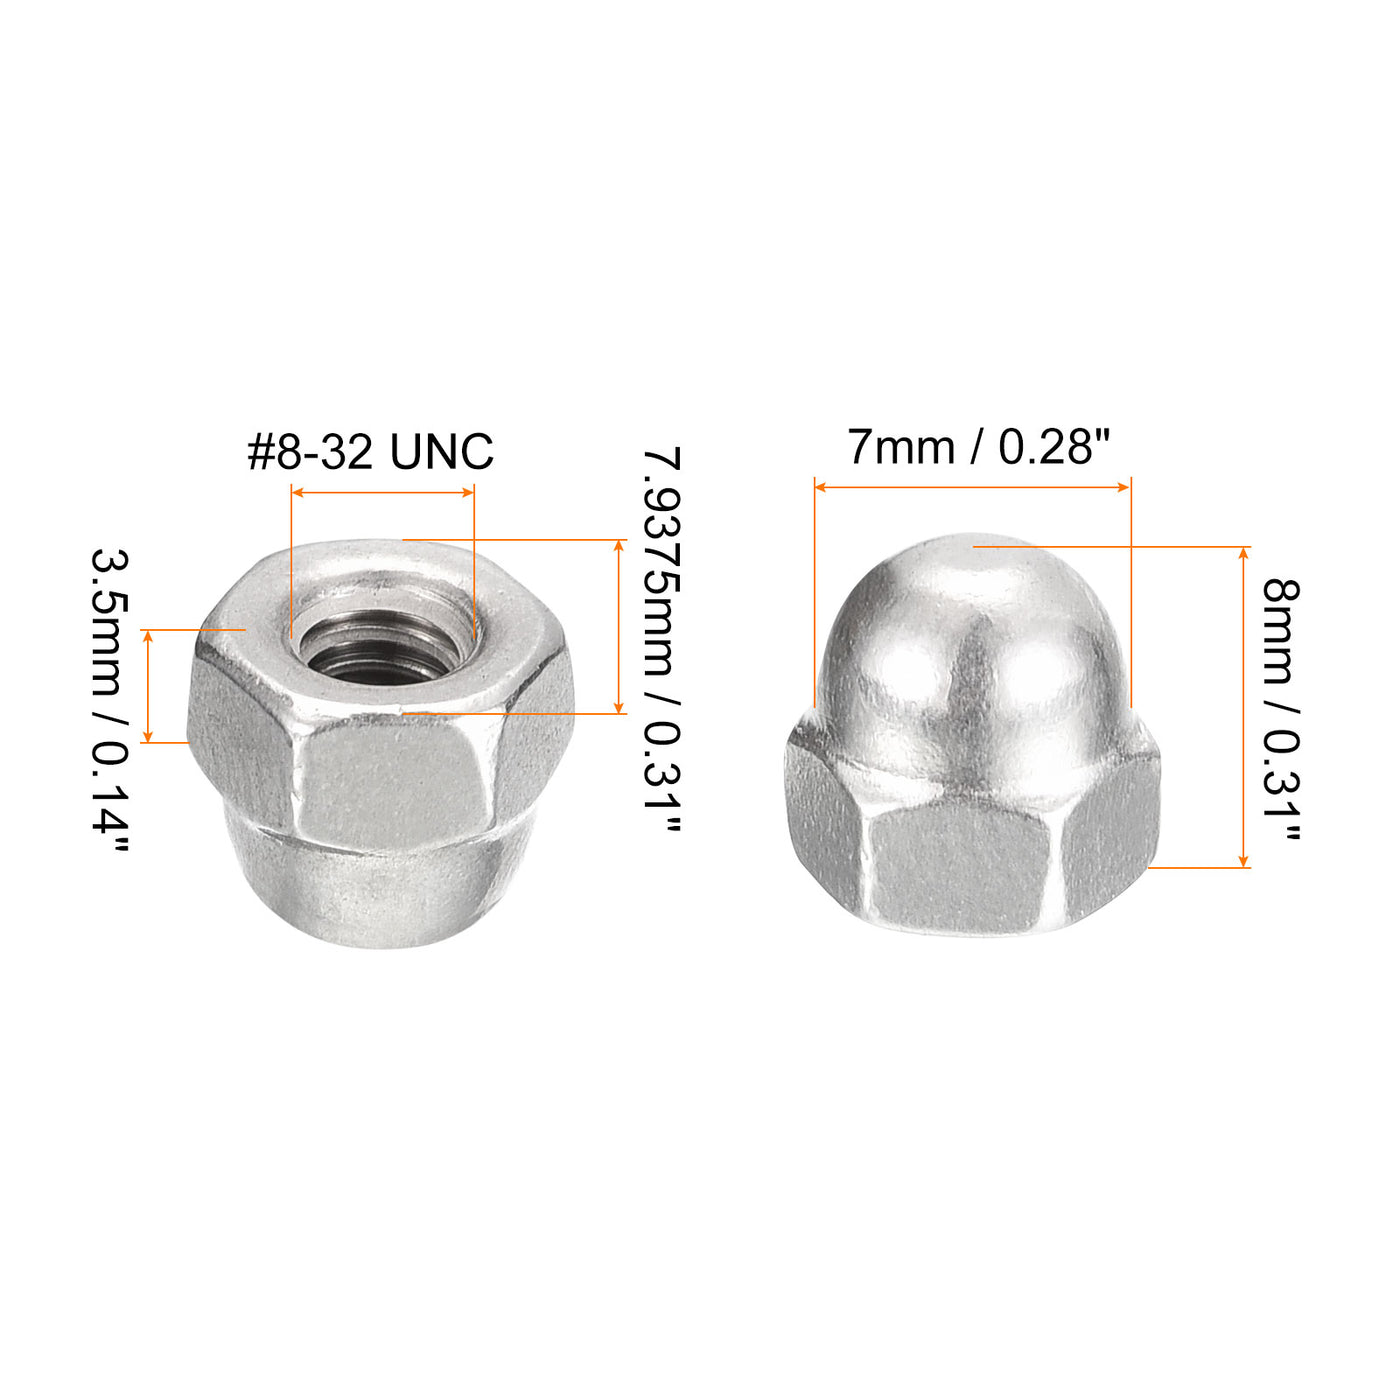 uxcell Uxcell #8-32 Acorn Cap Nuts,25pcs - 304 Stainless Steel Hardware Nuts, Acorn Hex Cap Dome Head Nuts for Fasteners (Silver)